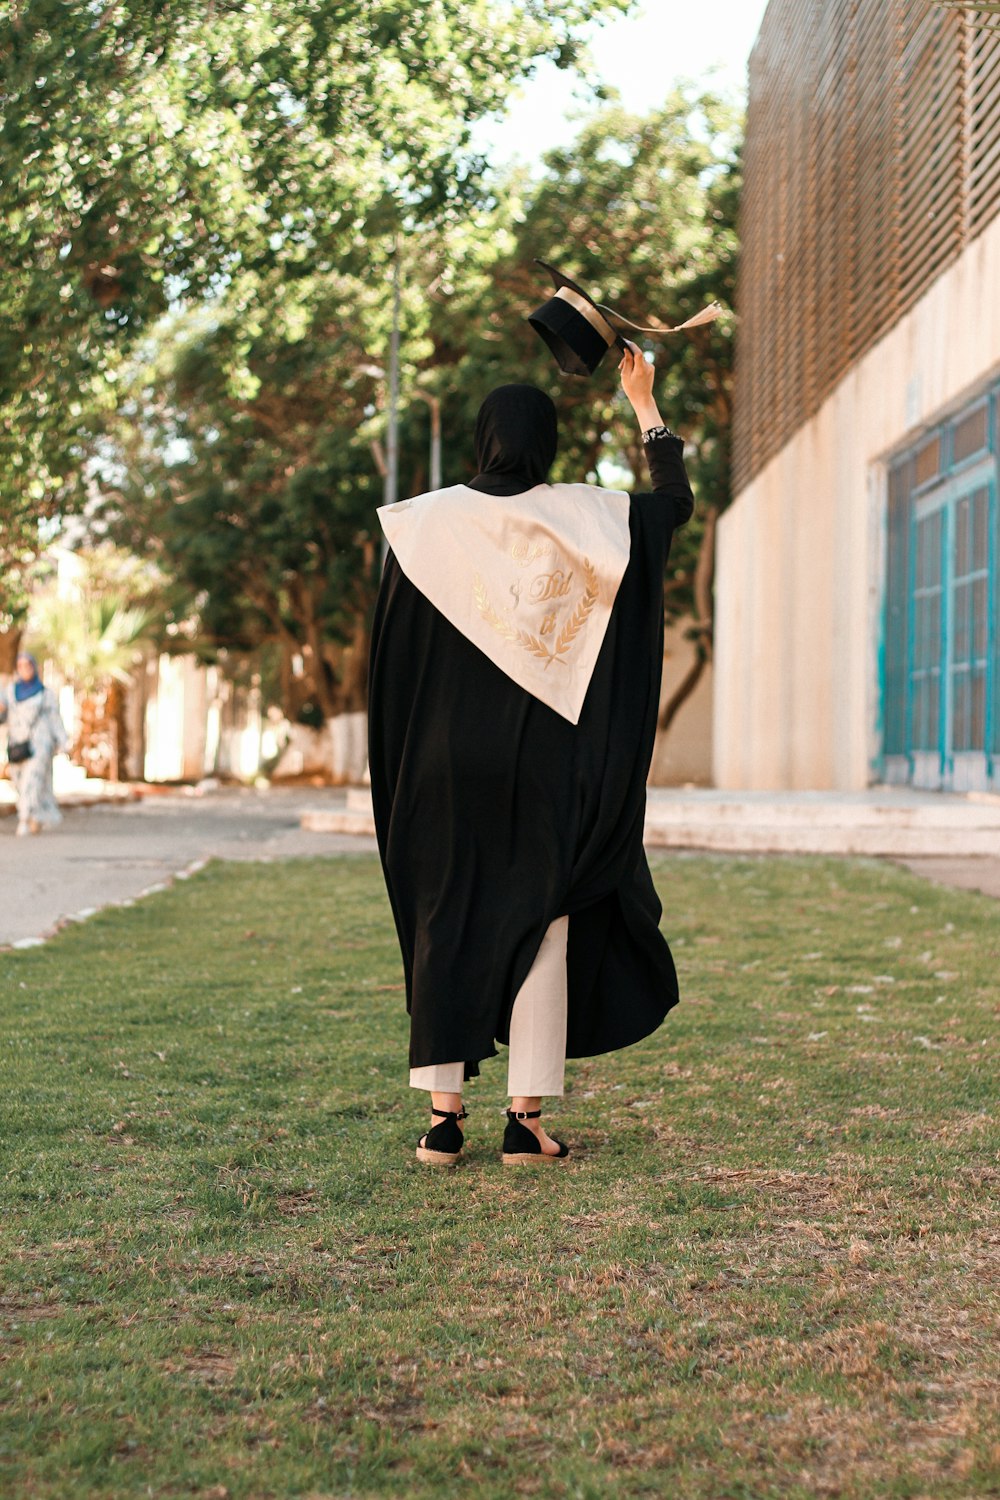 a person in a graduation gown throwing a hat in the air